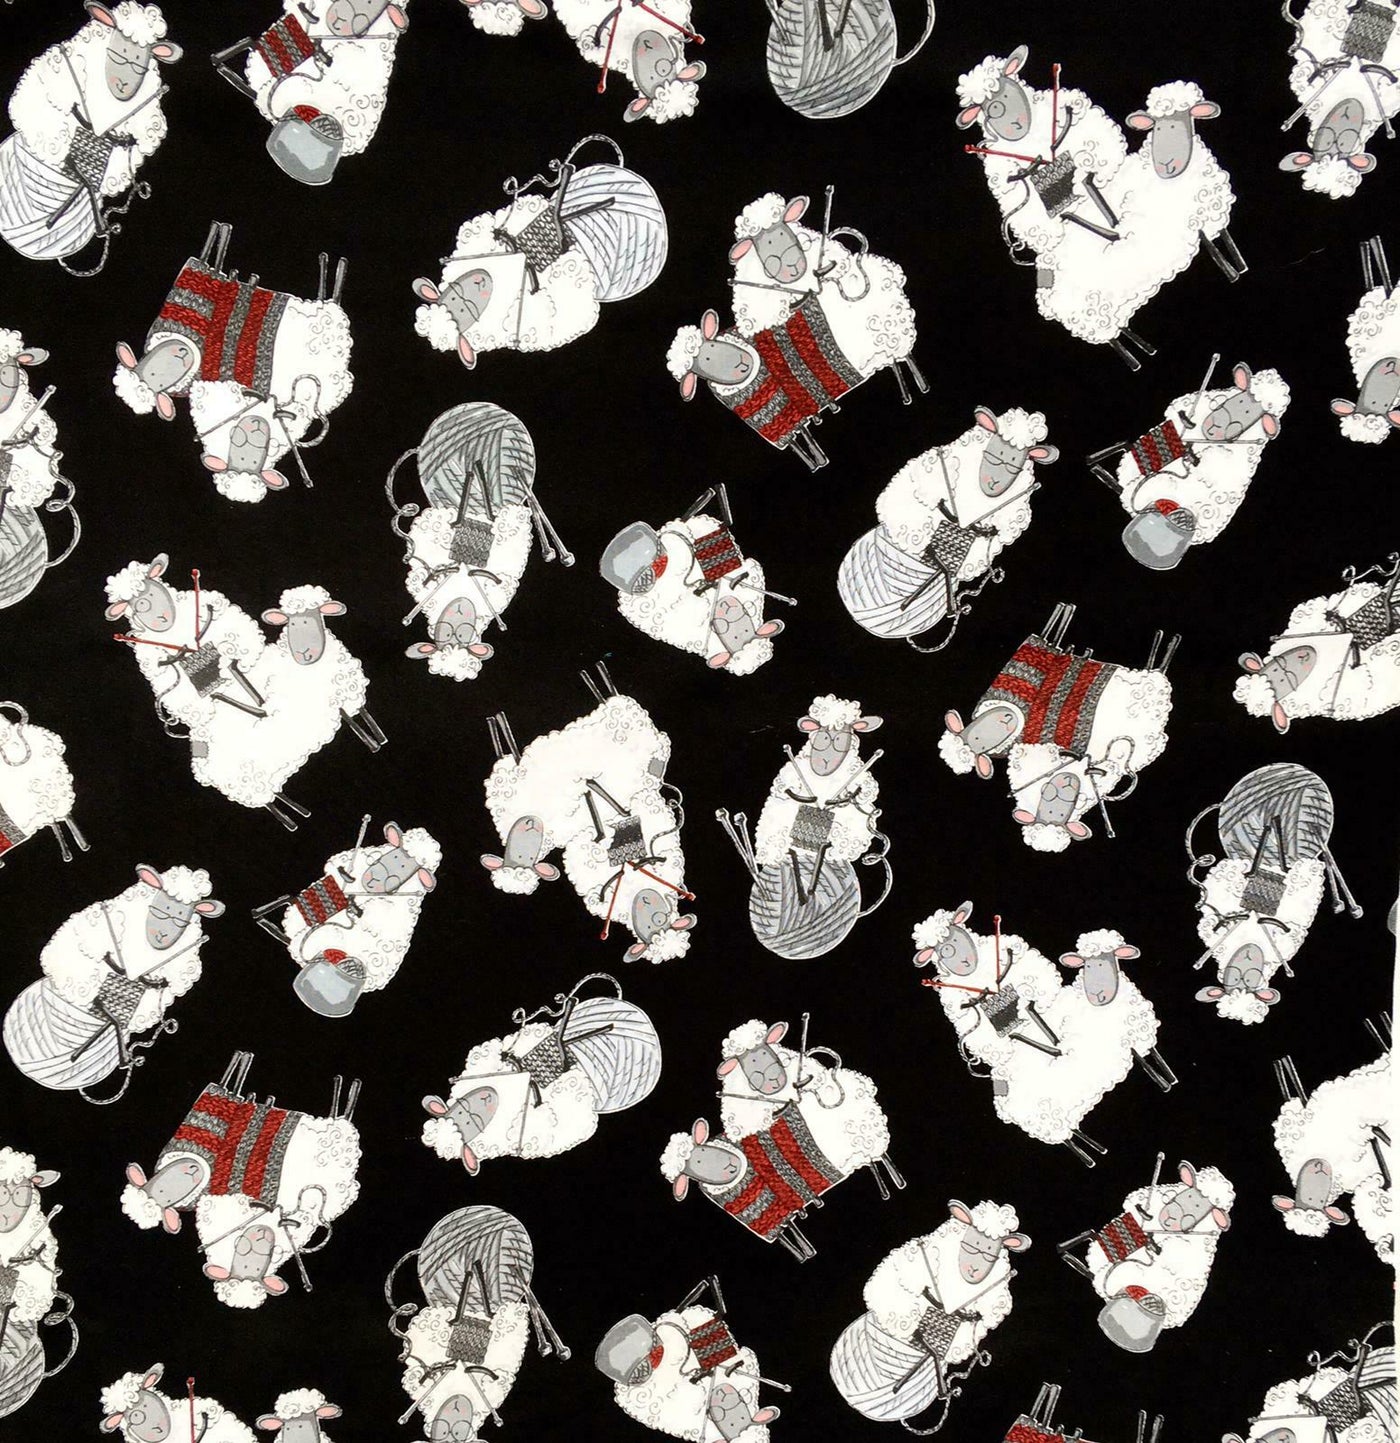 Crazy Knitting Sheep - Timeless Treasures - 100% Cotton Fabric